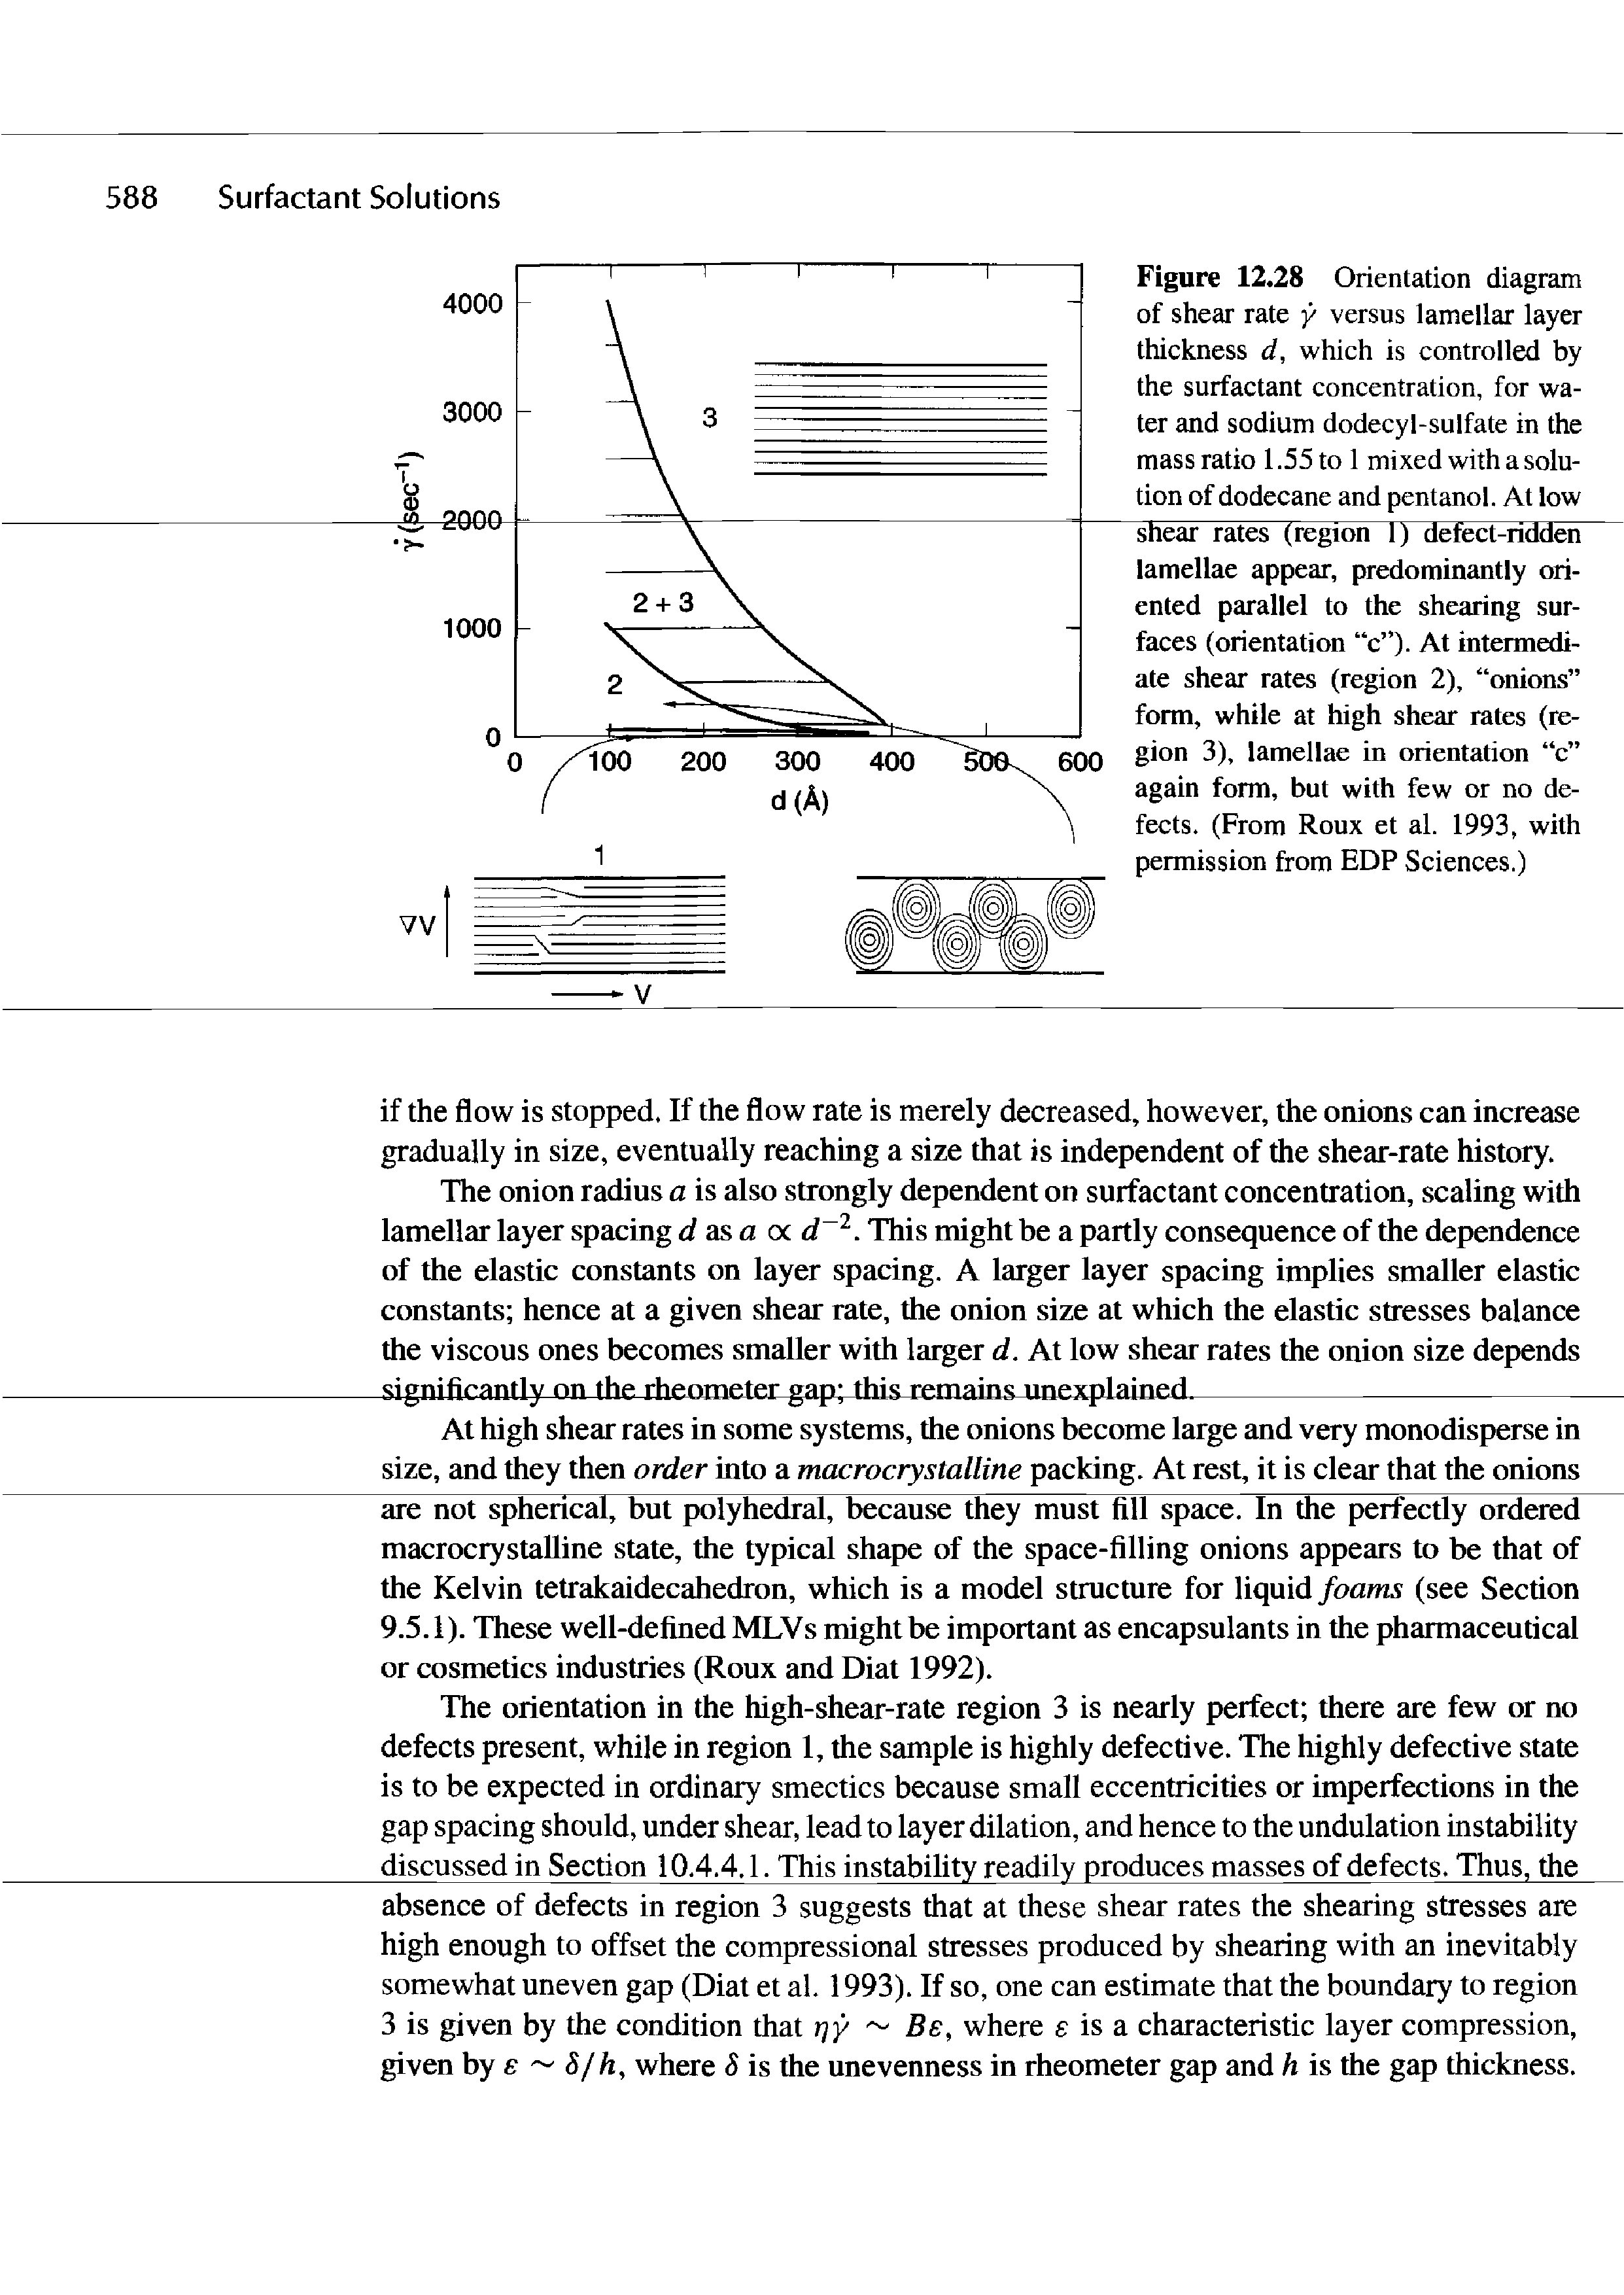 Figure 12.28 Orientation diagram of shear rate y versus lamellar layer thickness d, whieh is controlled by the surfactant concentration, for water and sodium dodecyl-sulfate in the mass ratio 1.55 to 1 mixed with a solution of dodecane and pentanol. At low shear rates (region 1) defect-ridden lamellae appear, predominantly oriented parallel to the shearing surfaces (orientation c ). At intermediate shear rates (region 2), onions form, while at high shear rates (region 3), lamellae in orientation c again form, but with few or no defects. (From Roux et al. 1993, with permission from EDP Sciences.)...